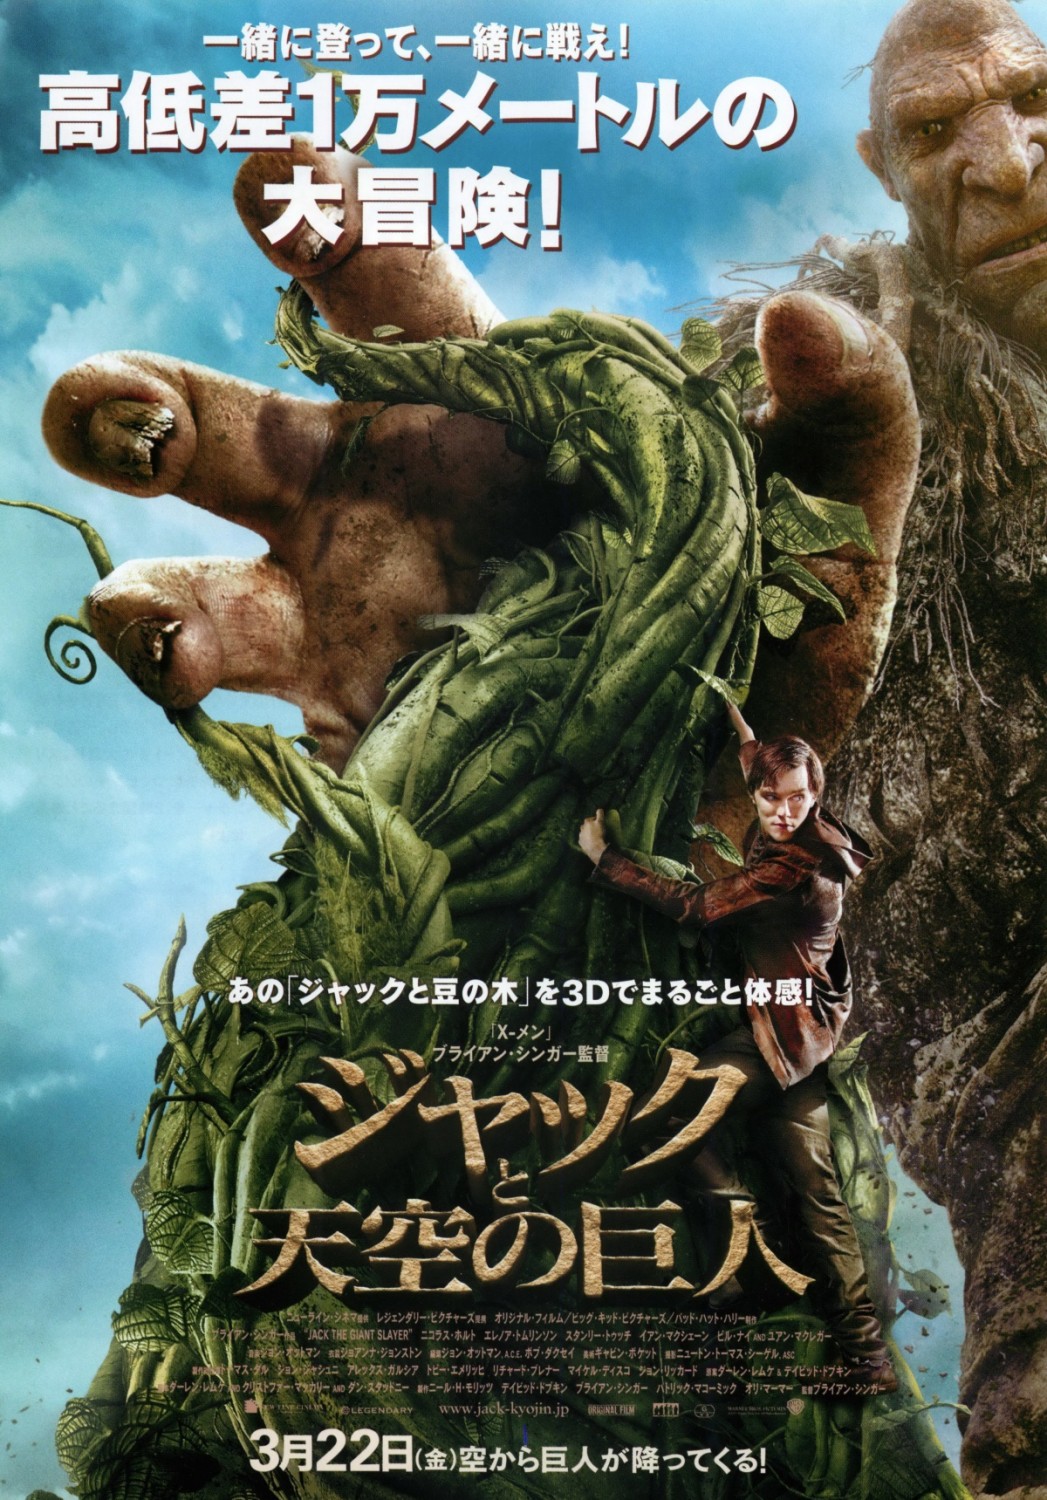 Extra Large Movie Poster Image for Jack the Giant Slayer (#21 of 21)